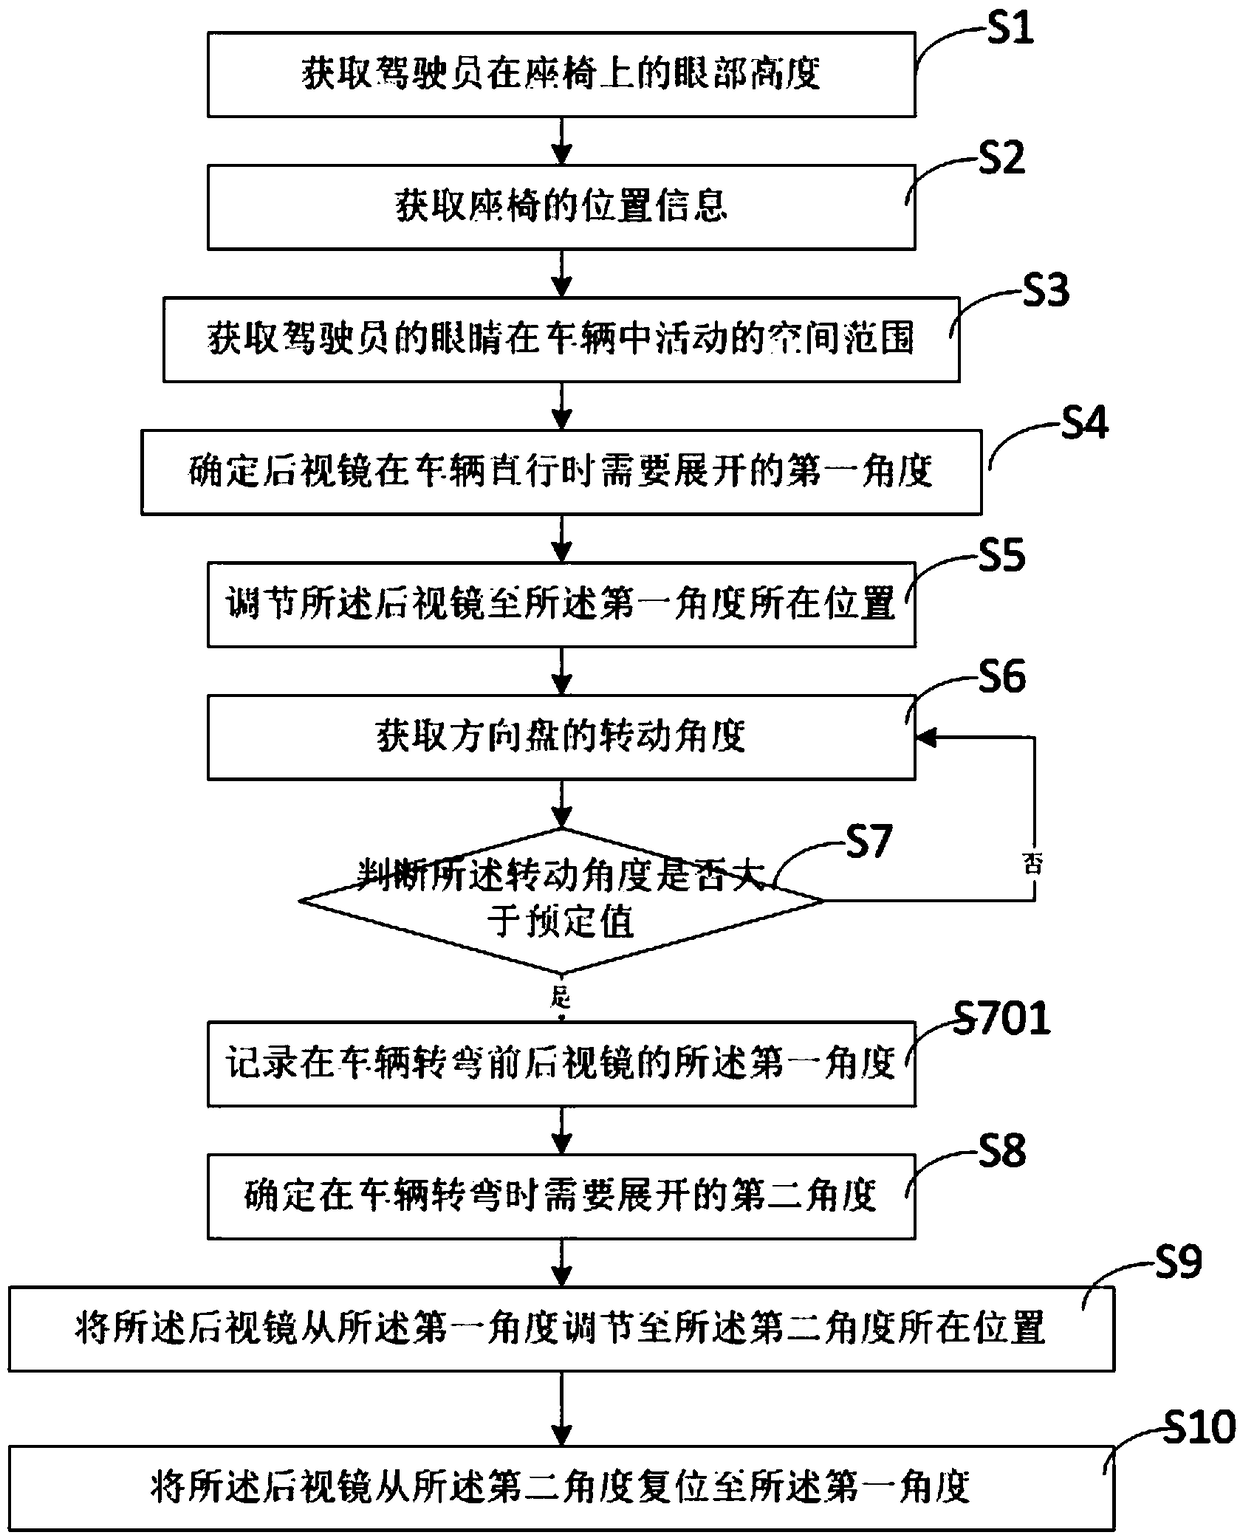 Self-adaptive system and method for rearview mirror of vehicle